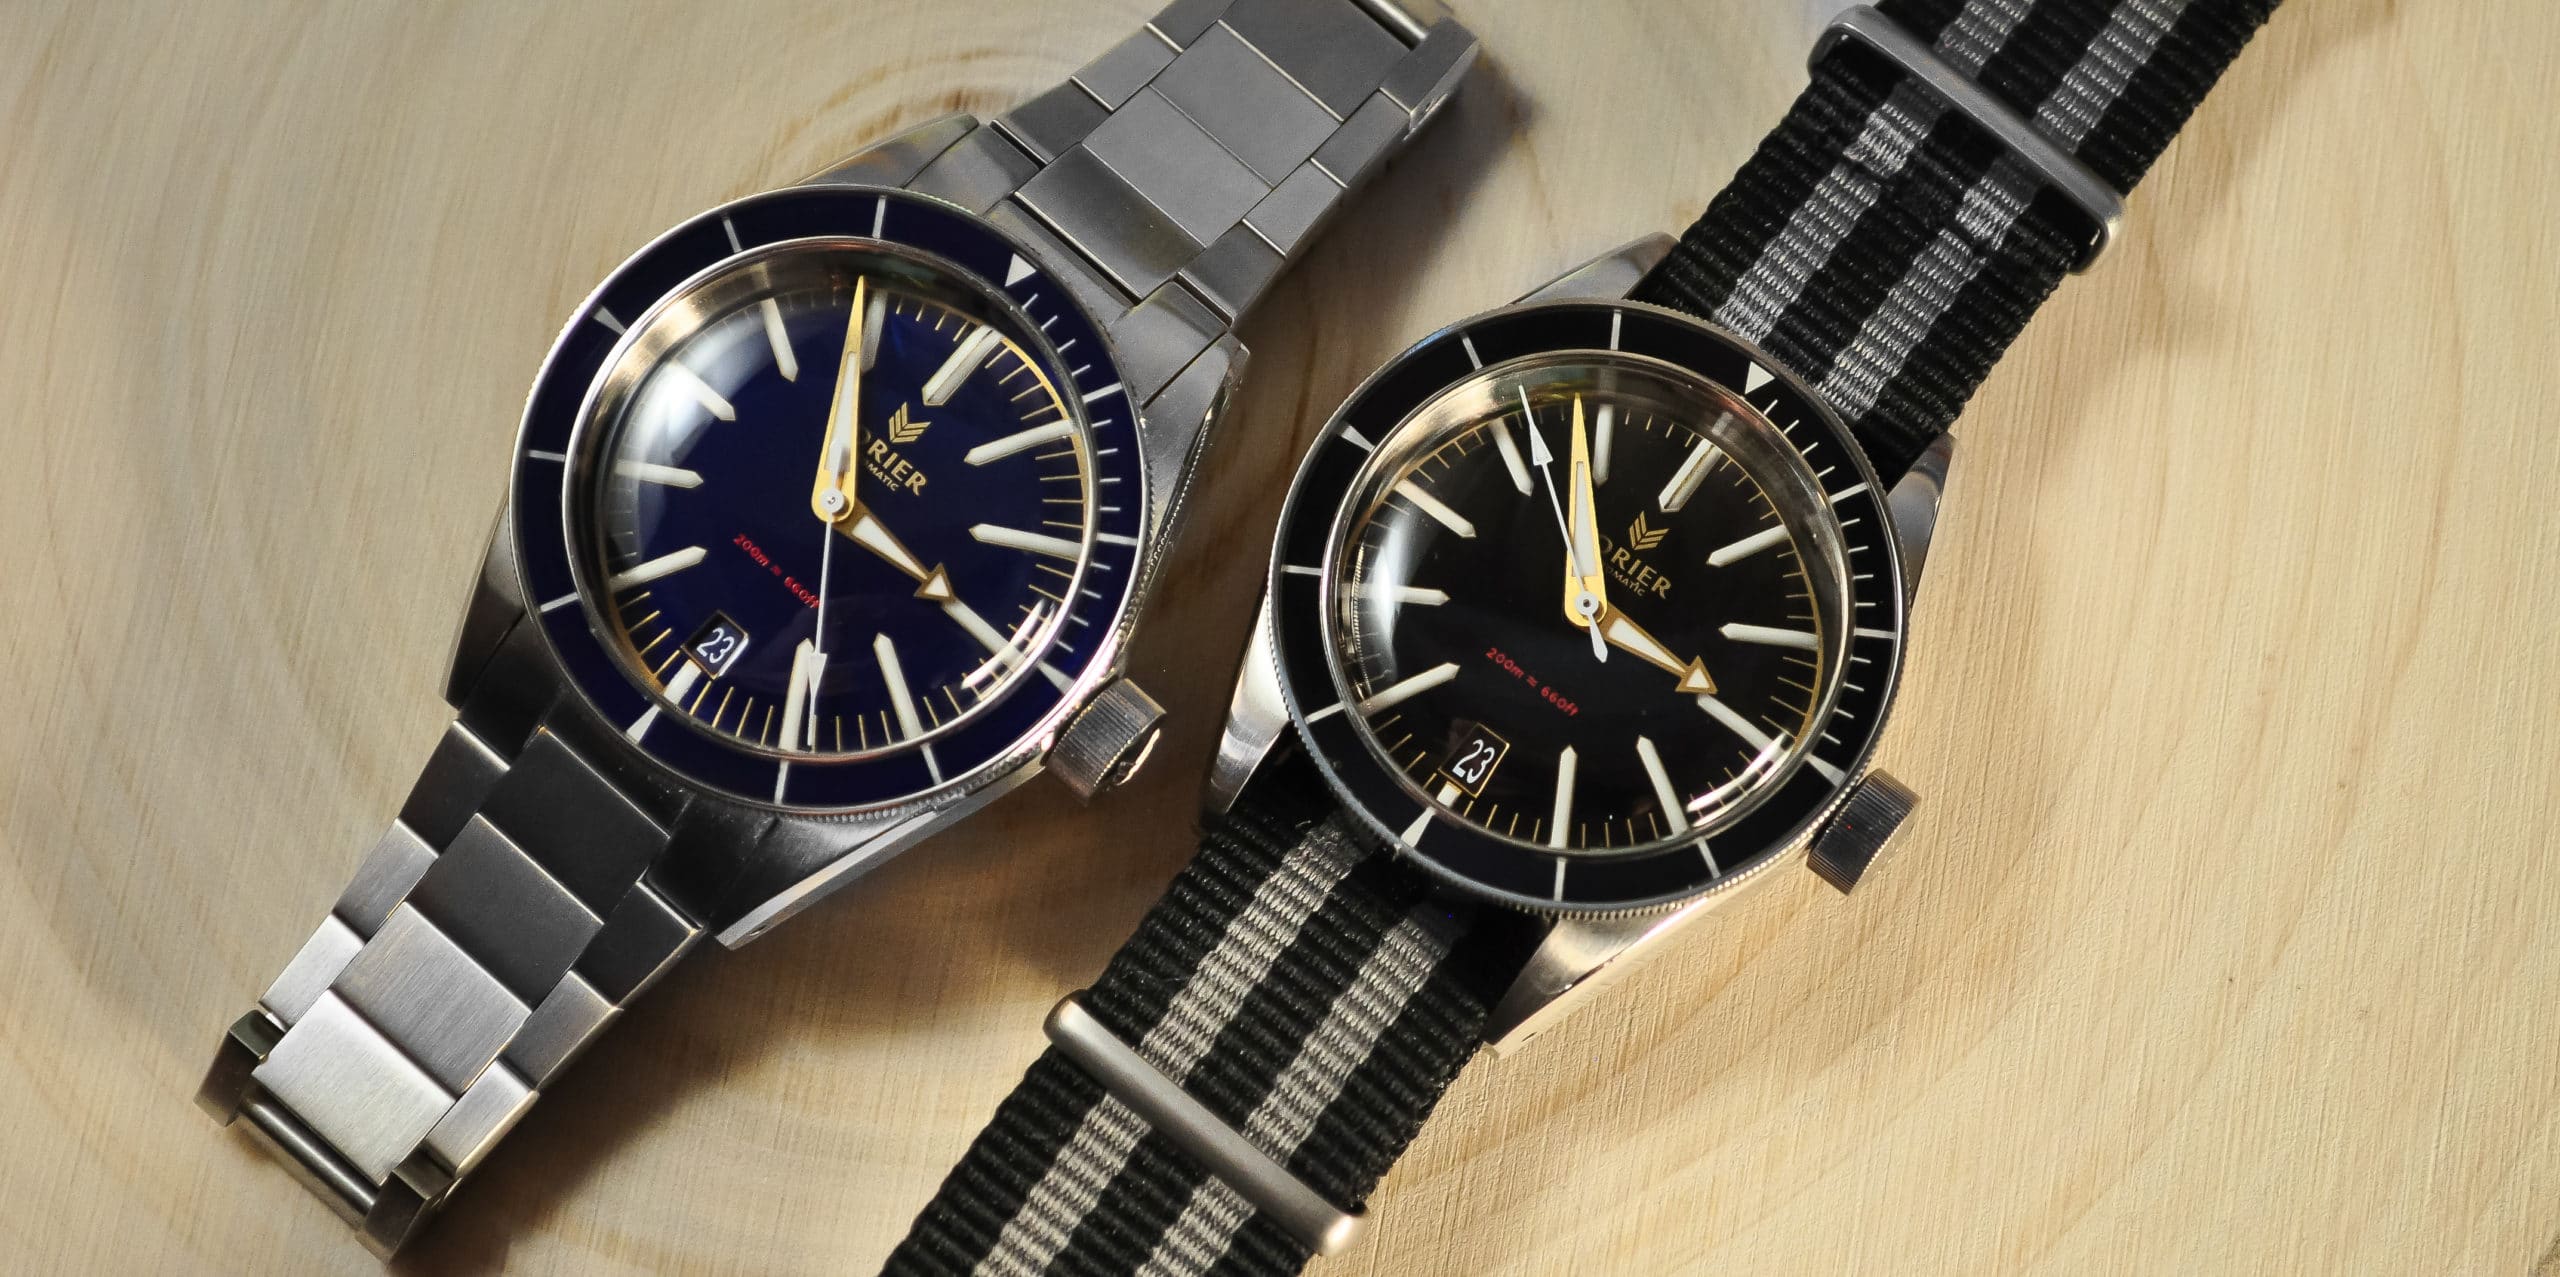 Lorier Hydra Review: Calling Off My Search For A Vintage-Inspired Diver?